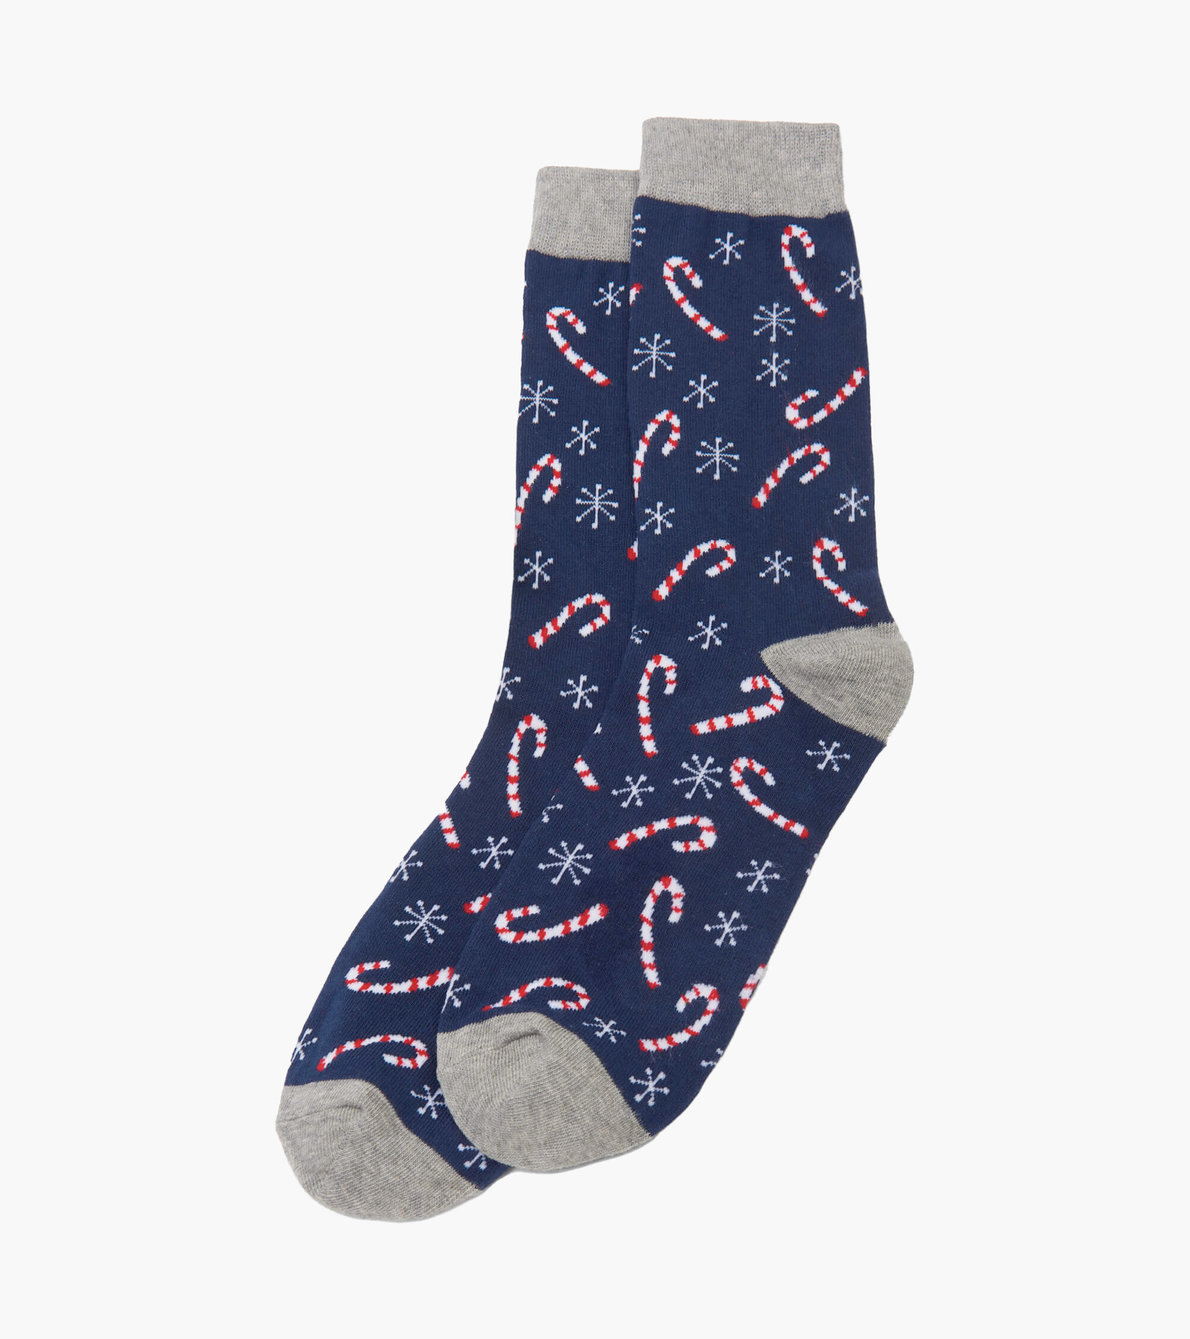 View larger image of Men's Candy Canes Crew Socks